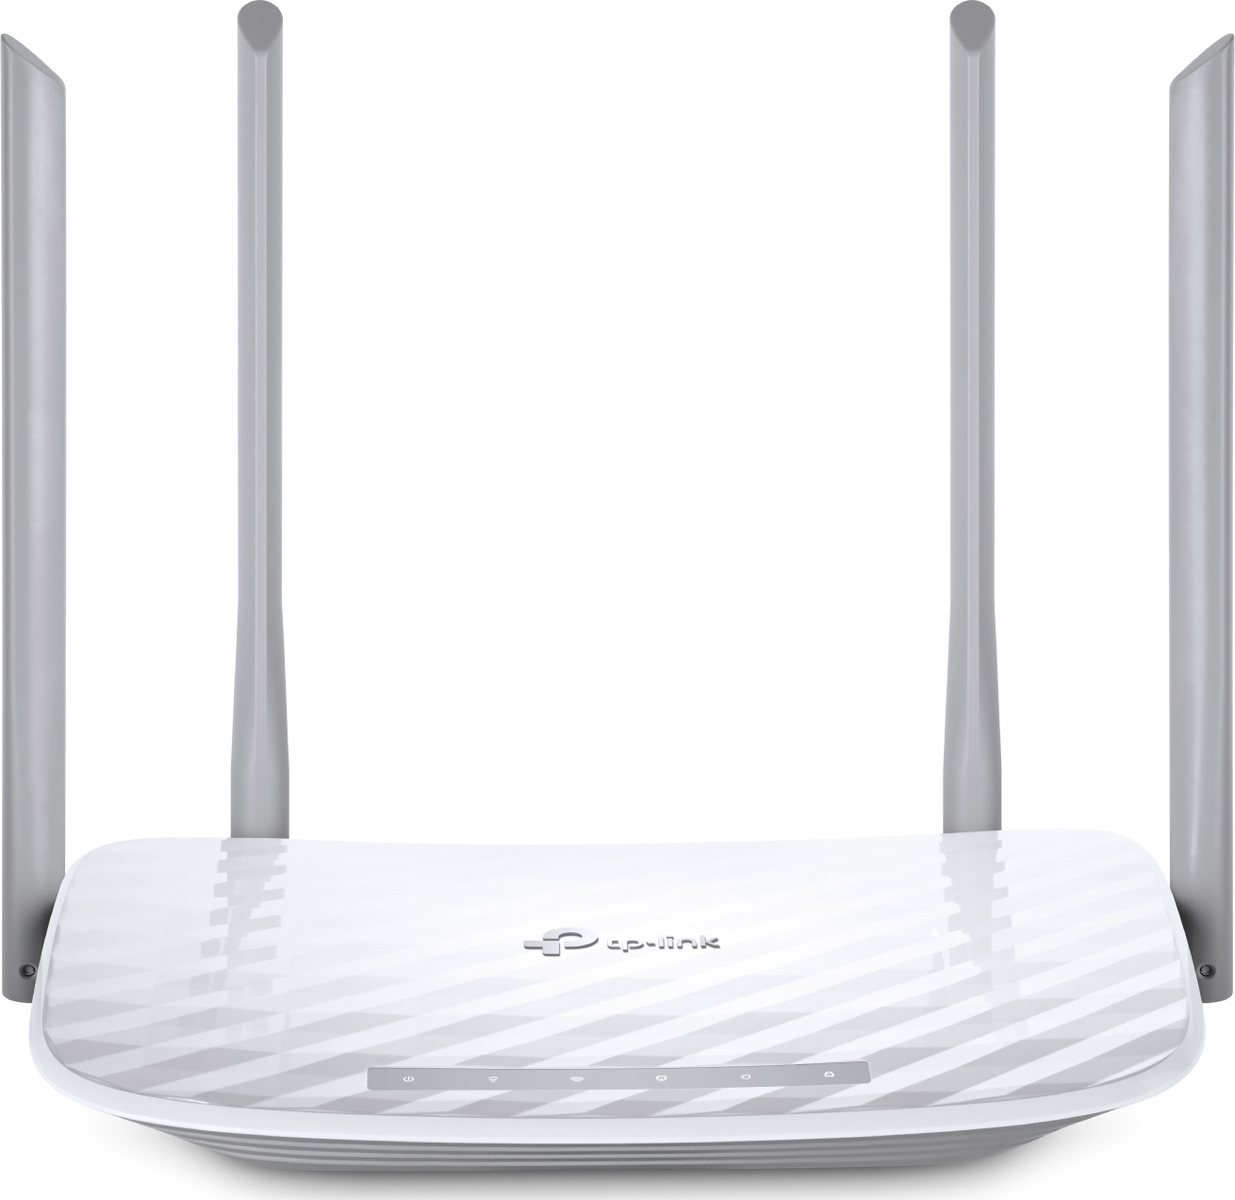 TP-Link Archer C50 v.6 AC1200 Wireless Dual Band Router